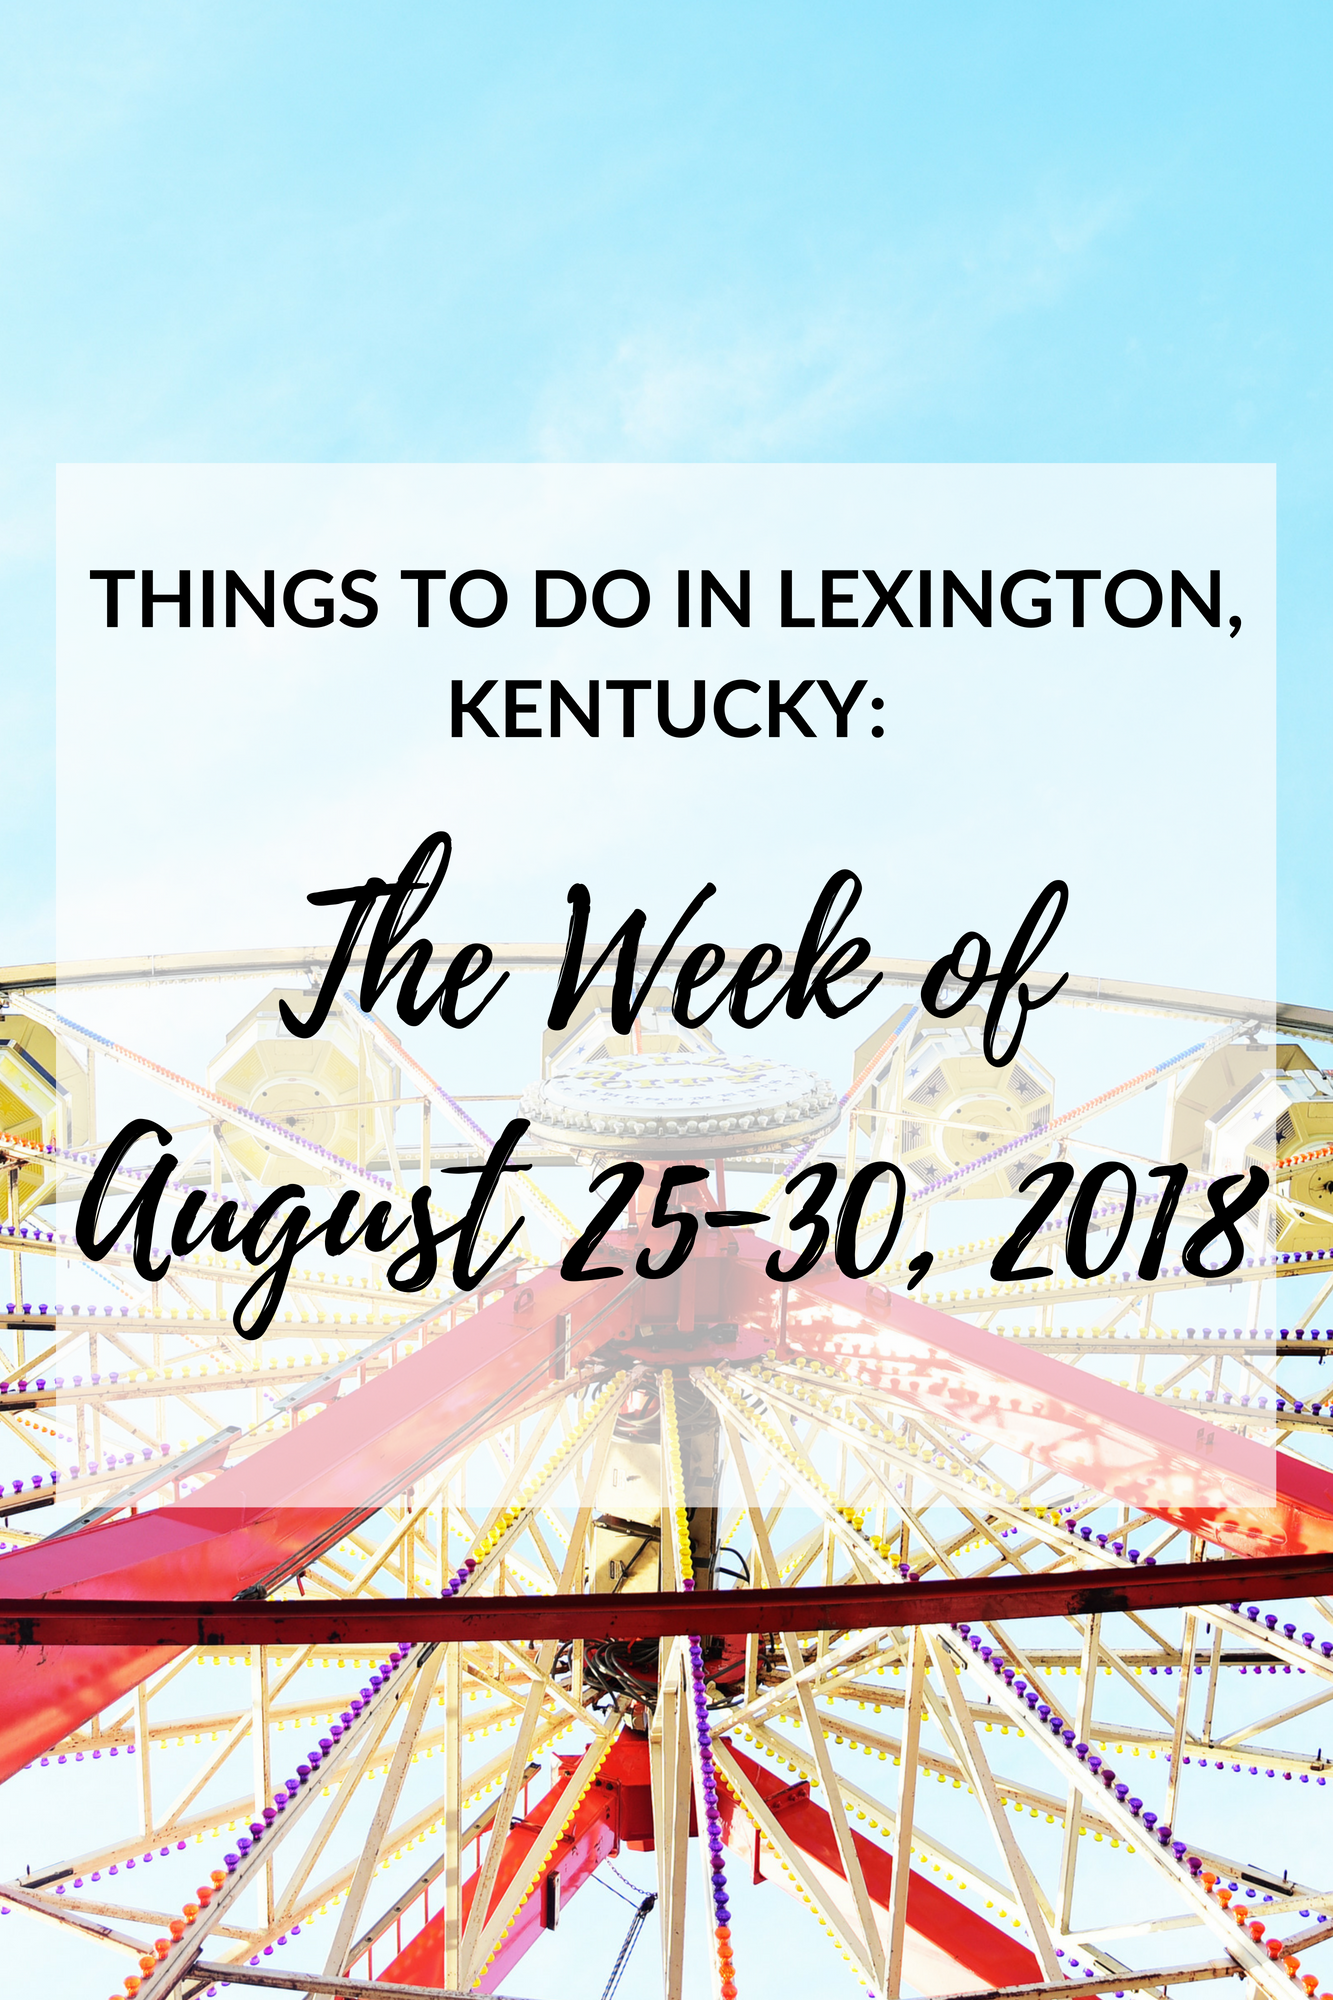 It's almost the end of August and this upcoming week looks exciting, especially this weekend with the Chevy Chase Street Fair. Check out some of the other events in Lexington coming up this week! #sharethelex #visitlex #lexingtonky #kentucky